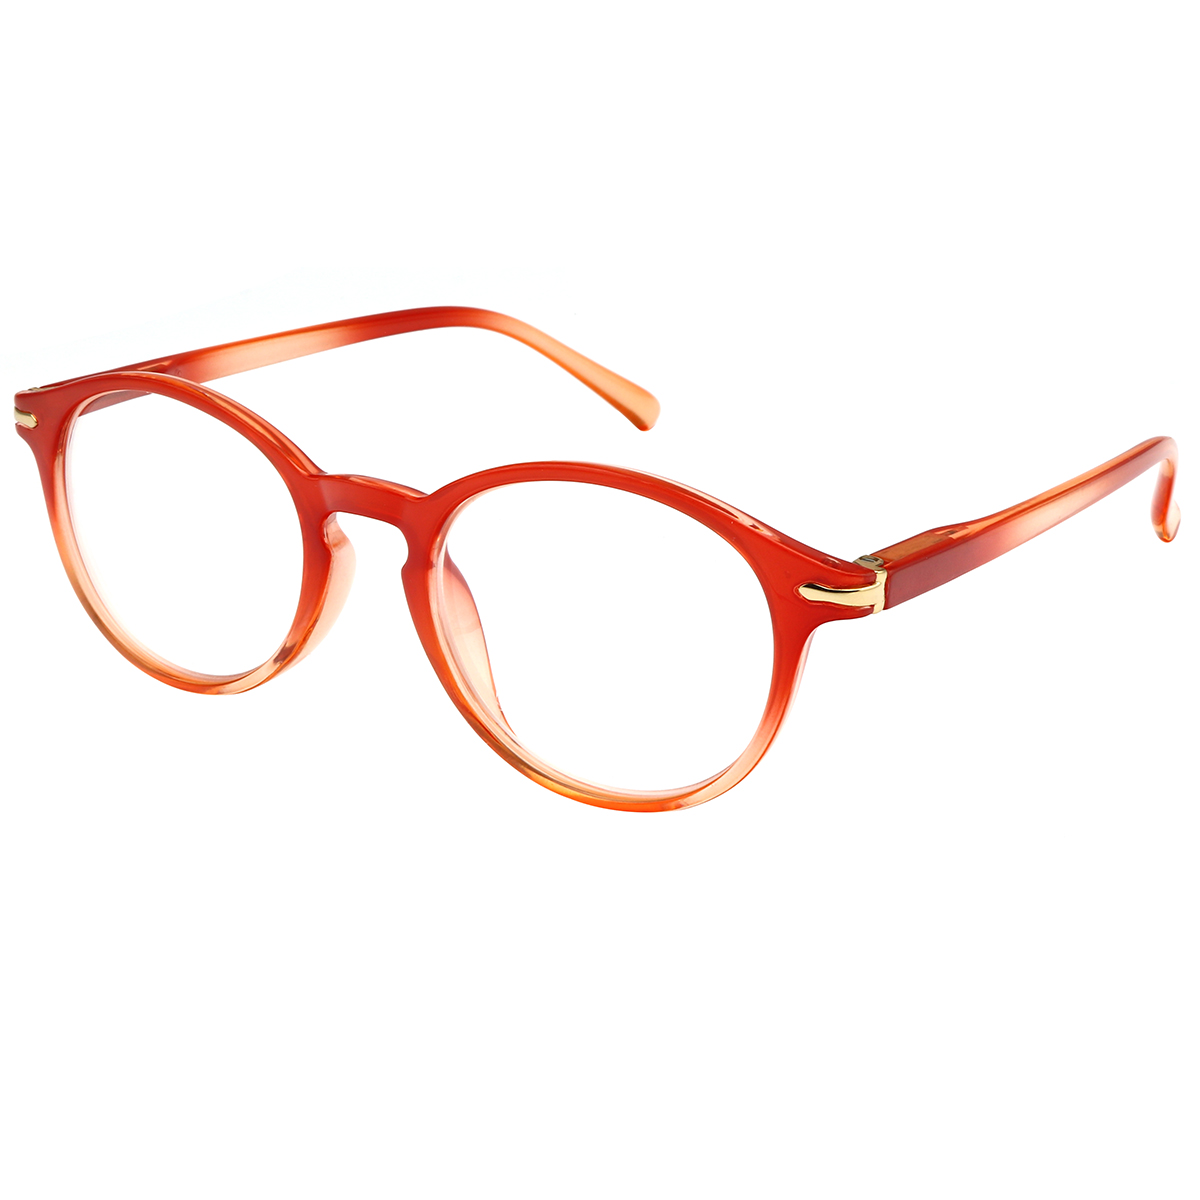 Gallaecia - Oval Red Reading Glasses for Women